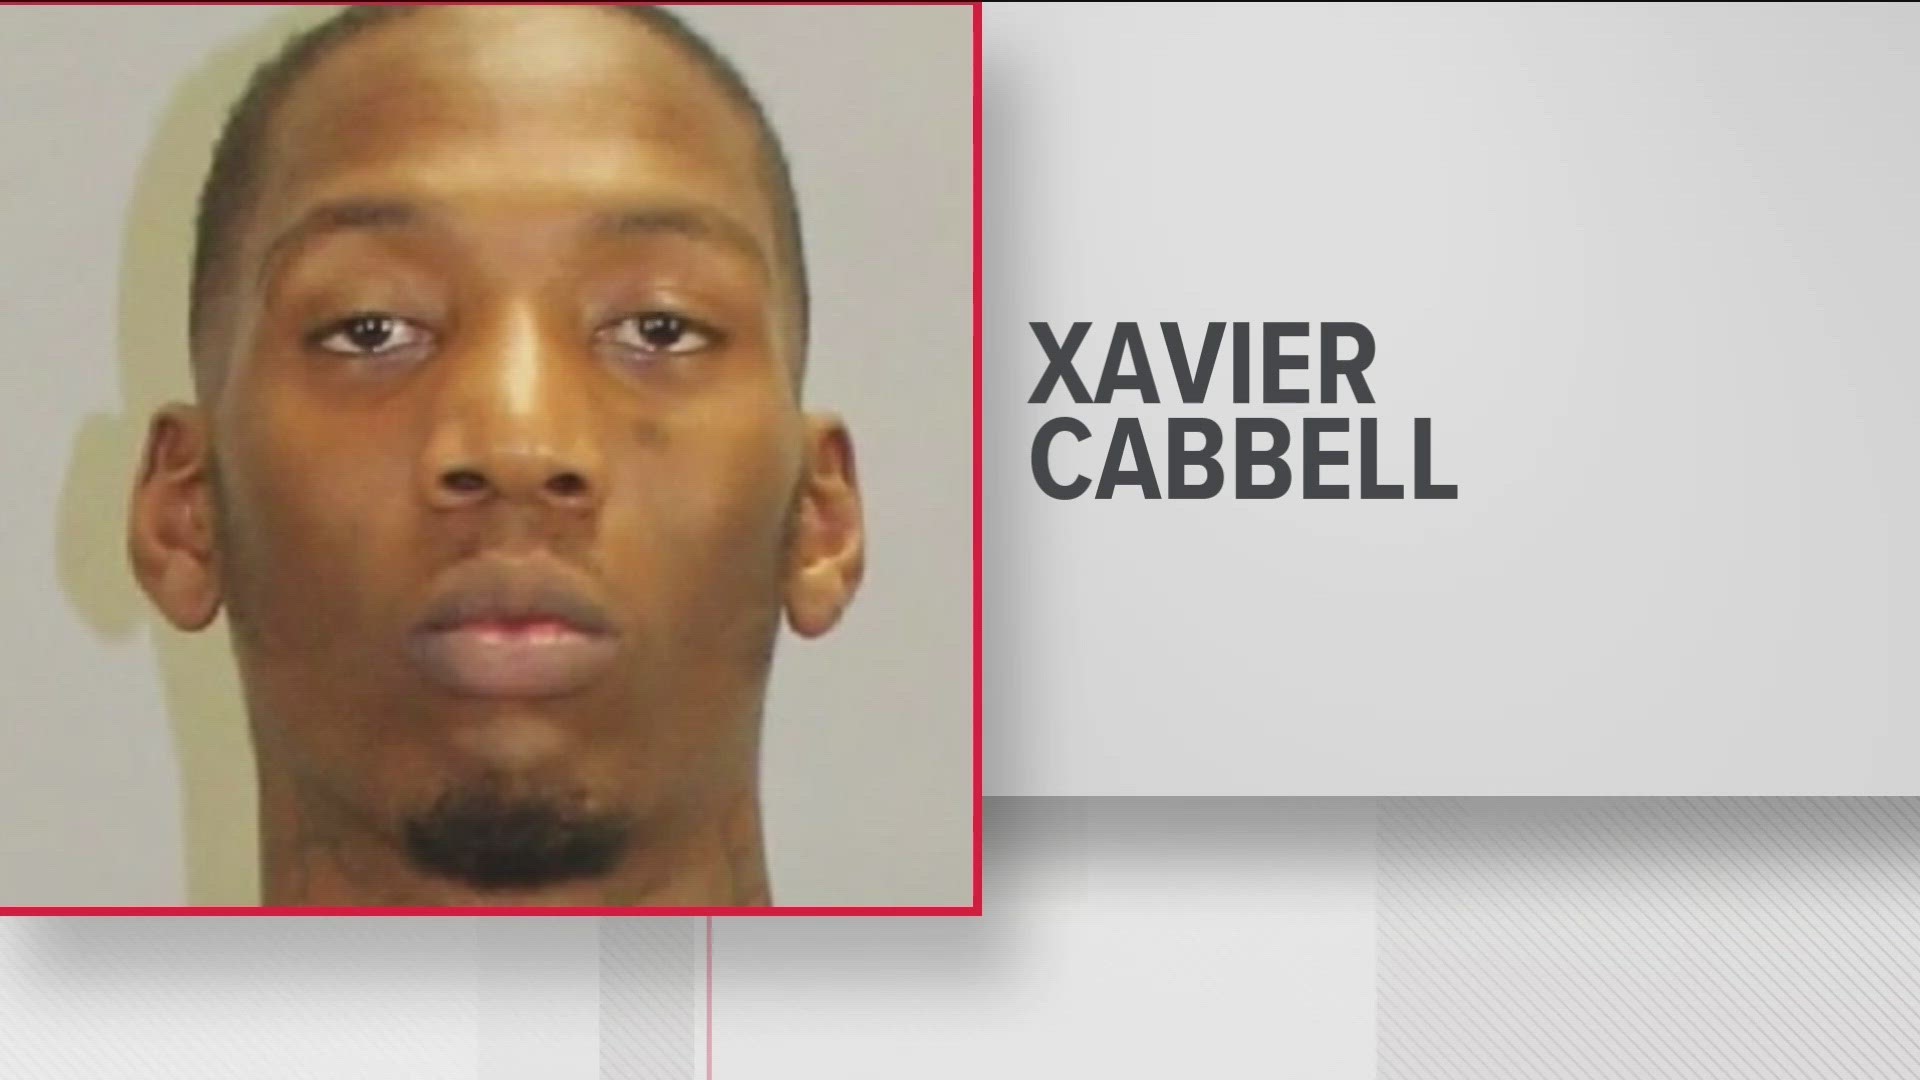 Xavier Cabbell was arrested on Friday after Clayton County Police Detectives were able to identify the suspect and secure warrants for his arrest at his home.